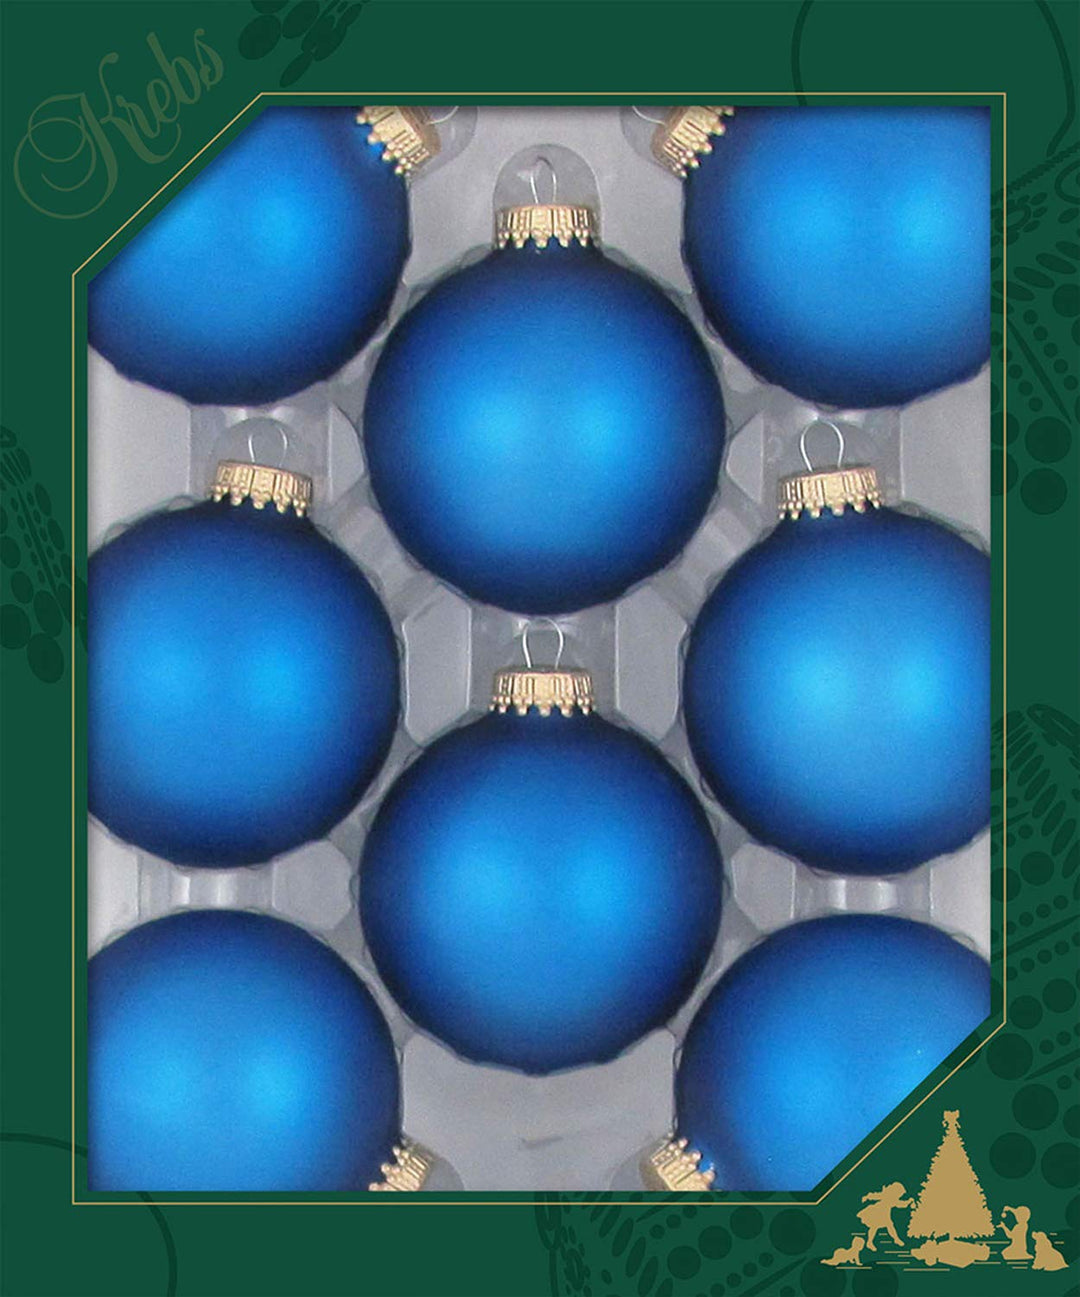 Glass Christmas Tree Ornaments - 67mm / 2.63" [8 Pieces] Designer Balls from Christmas By Krebs Seamless Hanging Holiday Decor (Velvet Classic Blue)